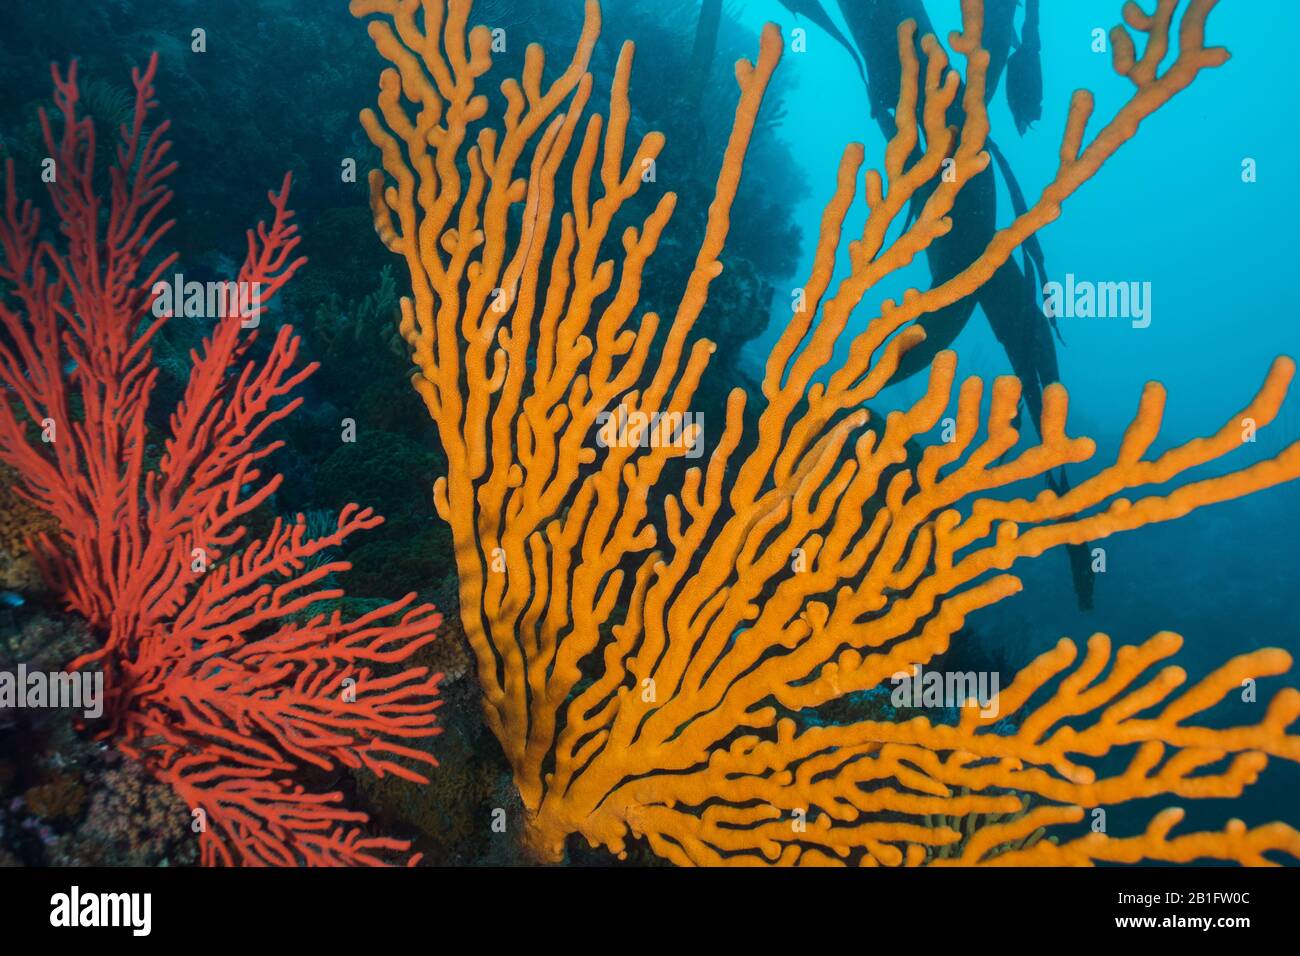 Close up of a Sinuous sea fan (Eunicella tricoronata), large orange sea fan filling the frame with smaller Palmate sea fan next to it. Stock Photo